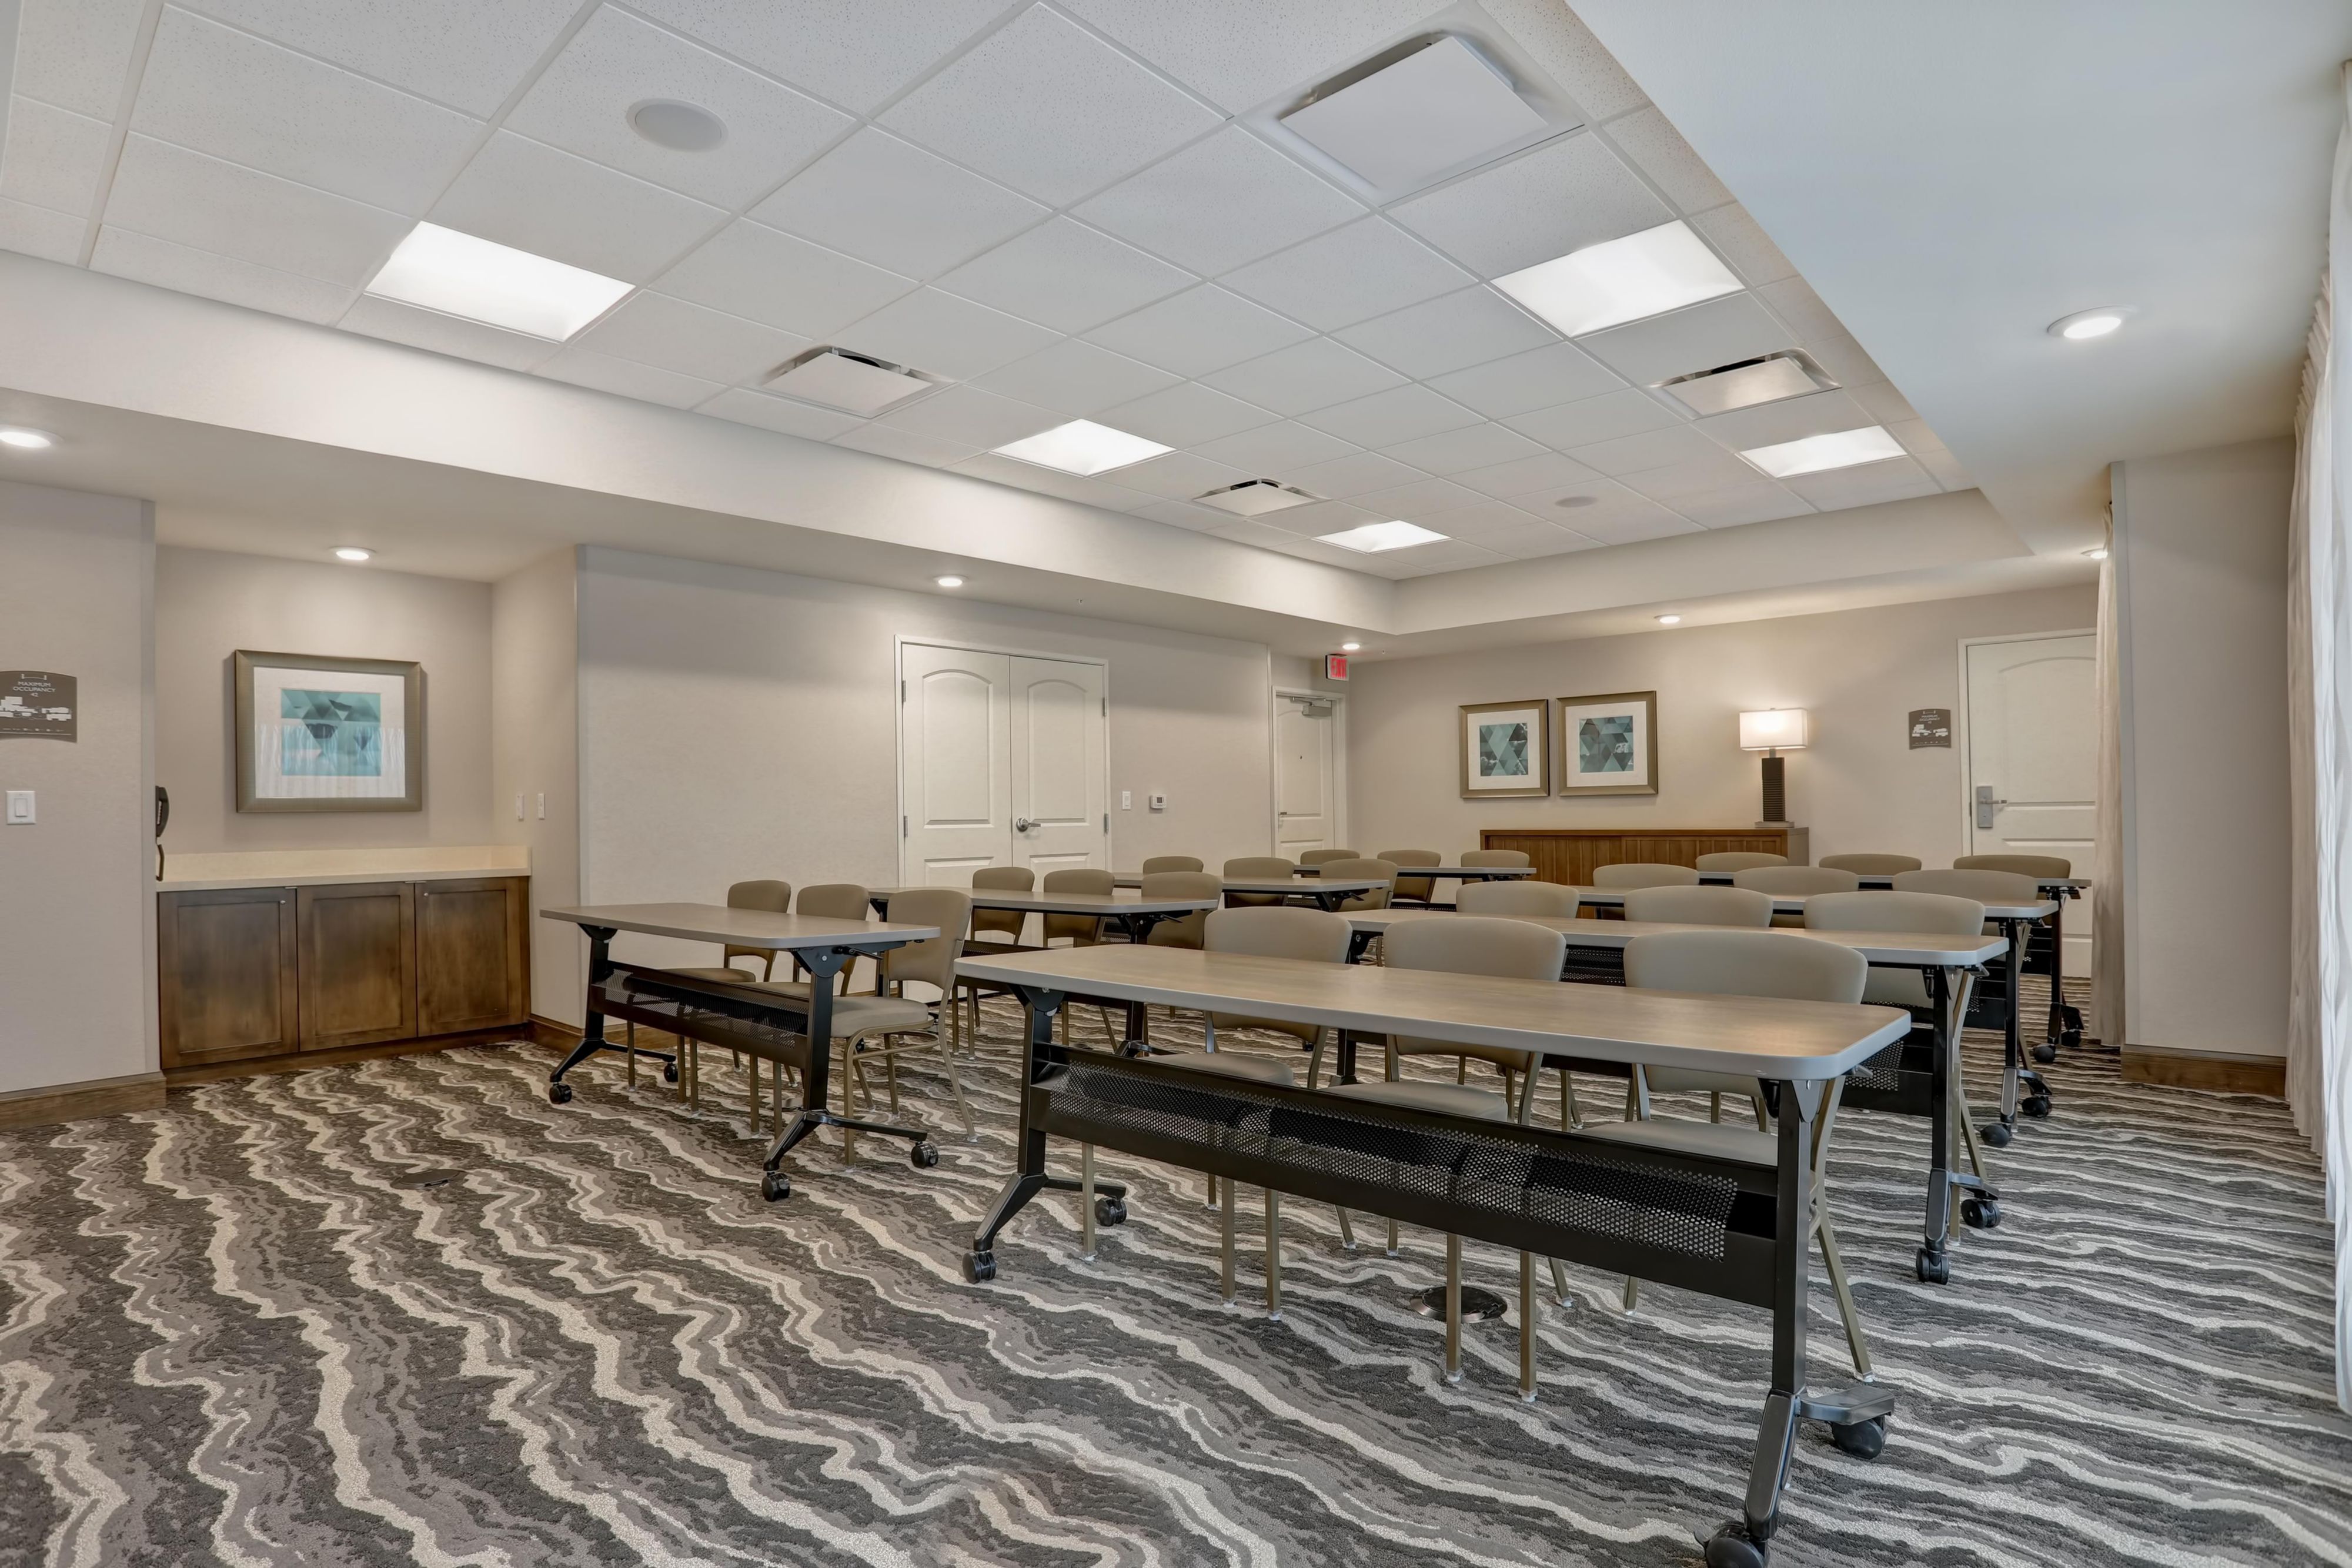 With over 600 square feet of flexible, stylish meeting space, we can host any kind of board meeting, social function, seminar or training with personalized attention. Please contact us to discuss our variety of catering and audio-visual options.  We would love to help make your next meeting or an event in the Overland Park area a success!